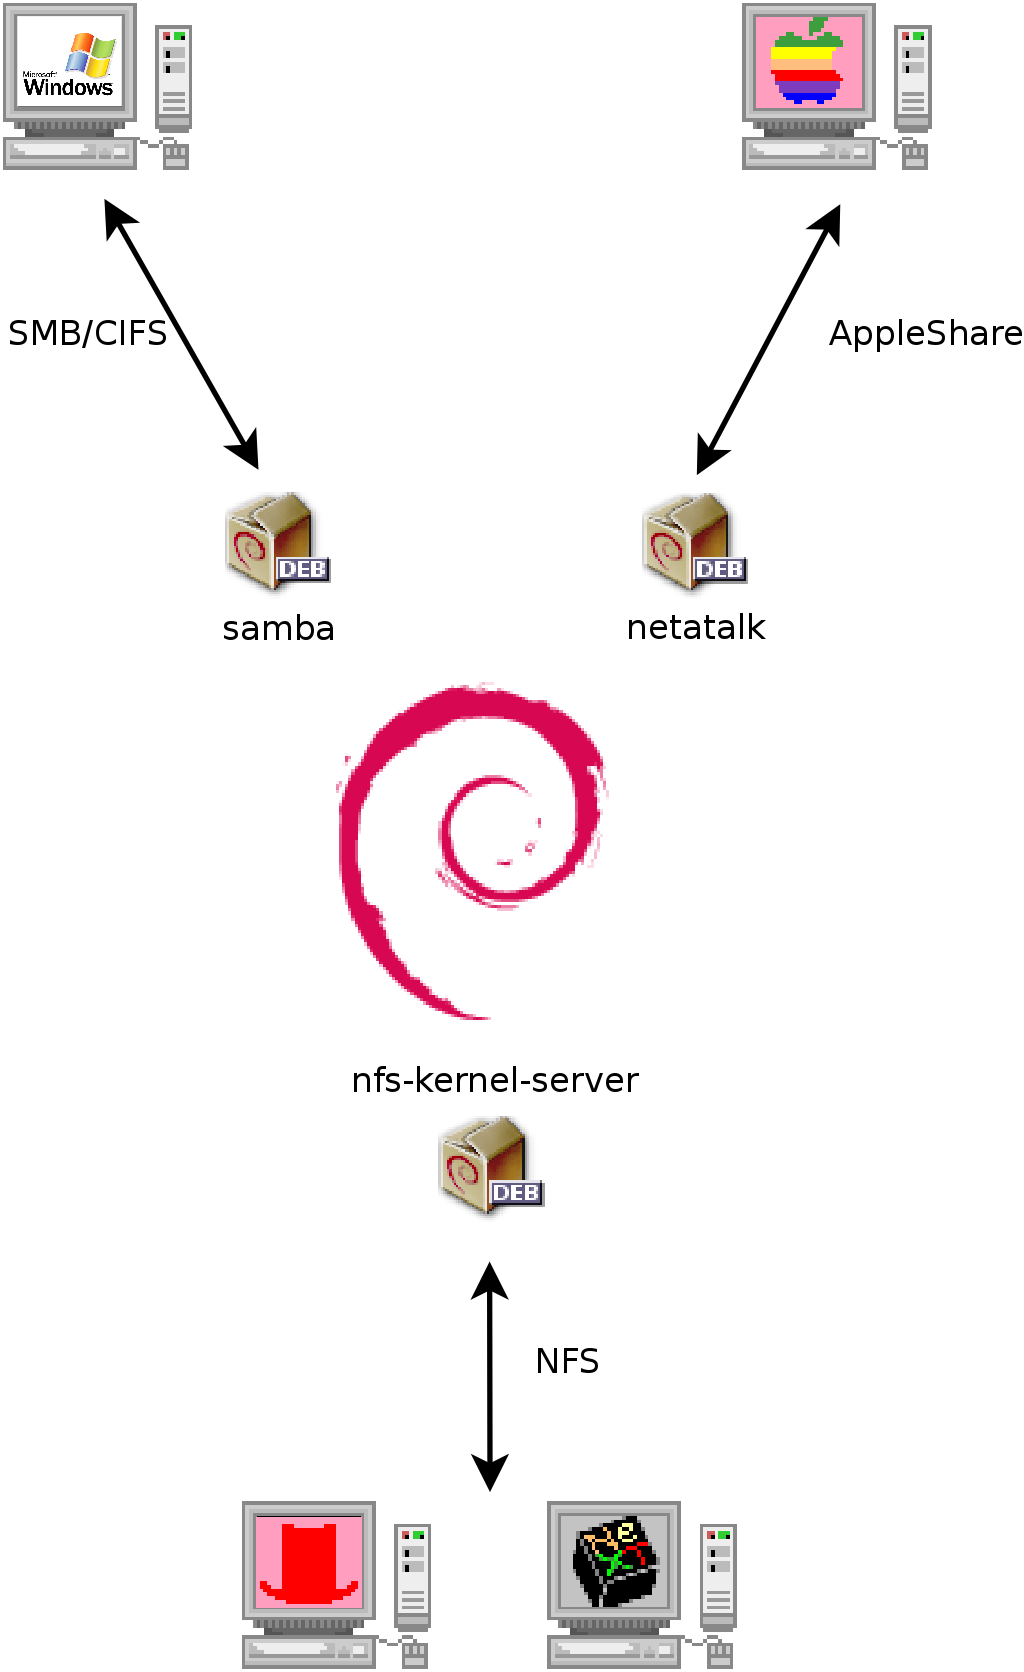 Coexistence of Debian with MacOS, Windows and Unix systems